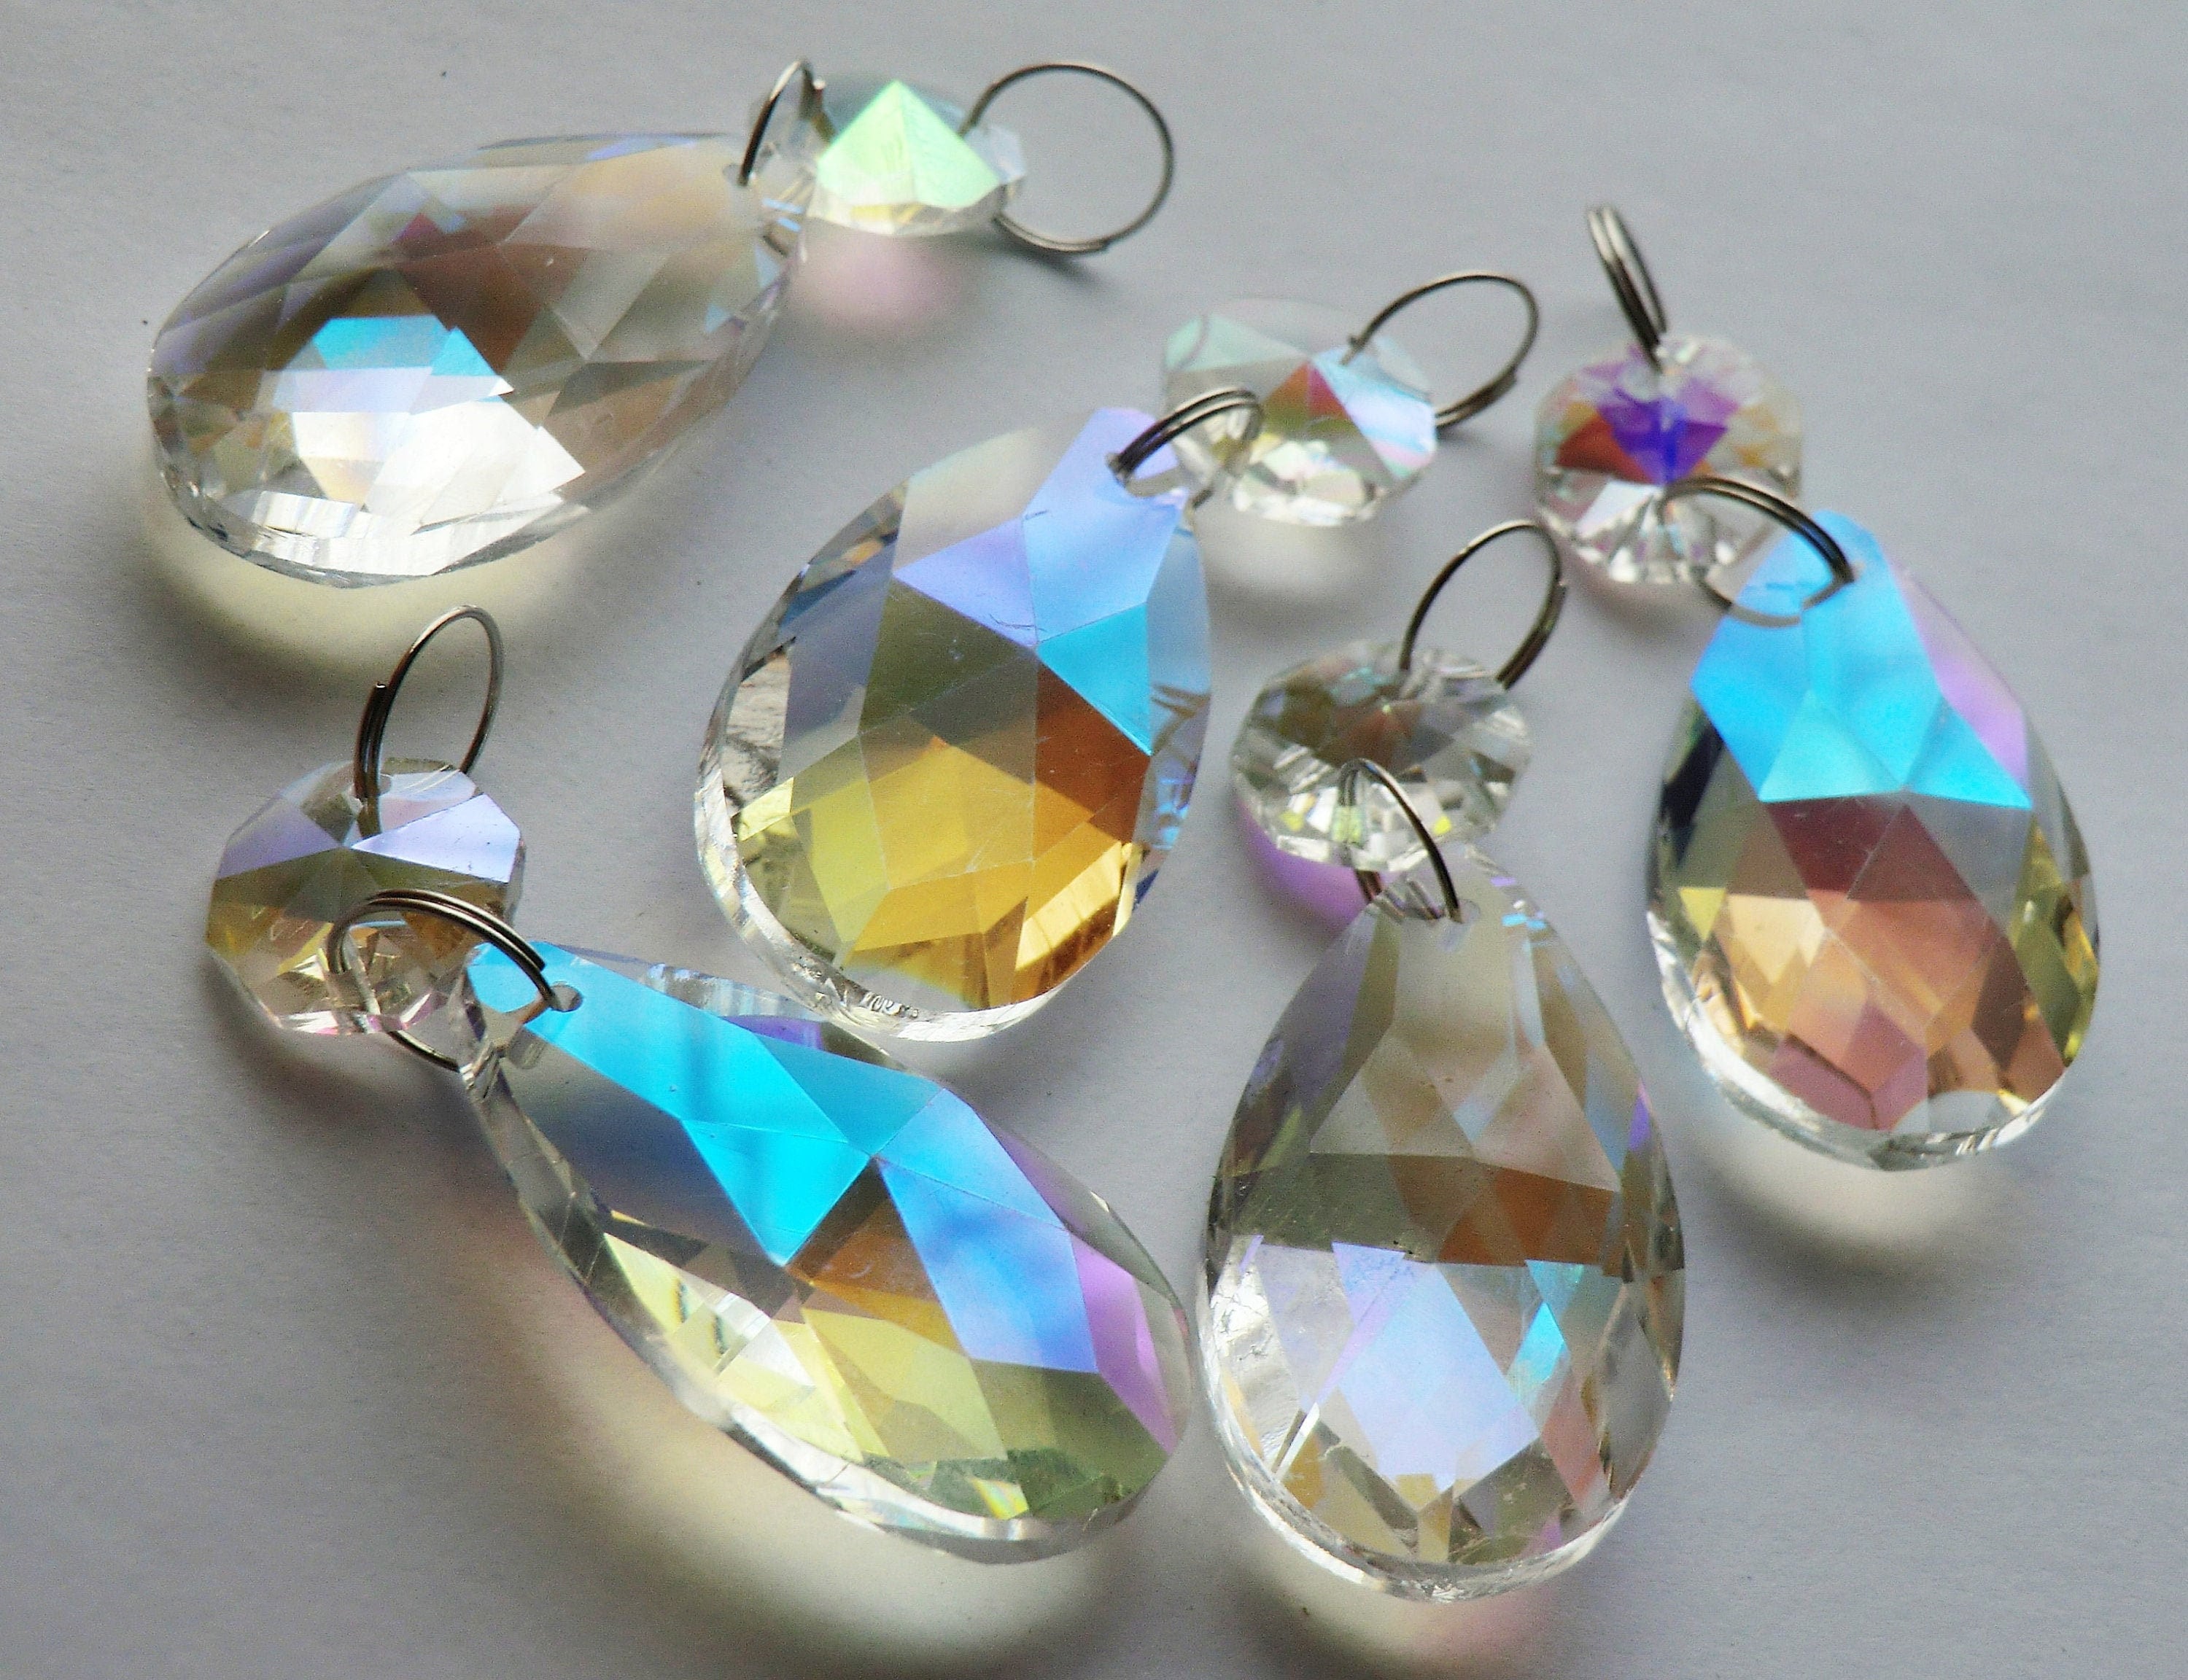 Details about   50X Clear Glass Crystals Beads Chandelier Light Pendant Parts Prisms Bling Drops 